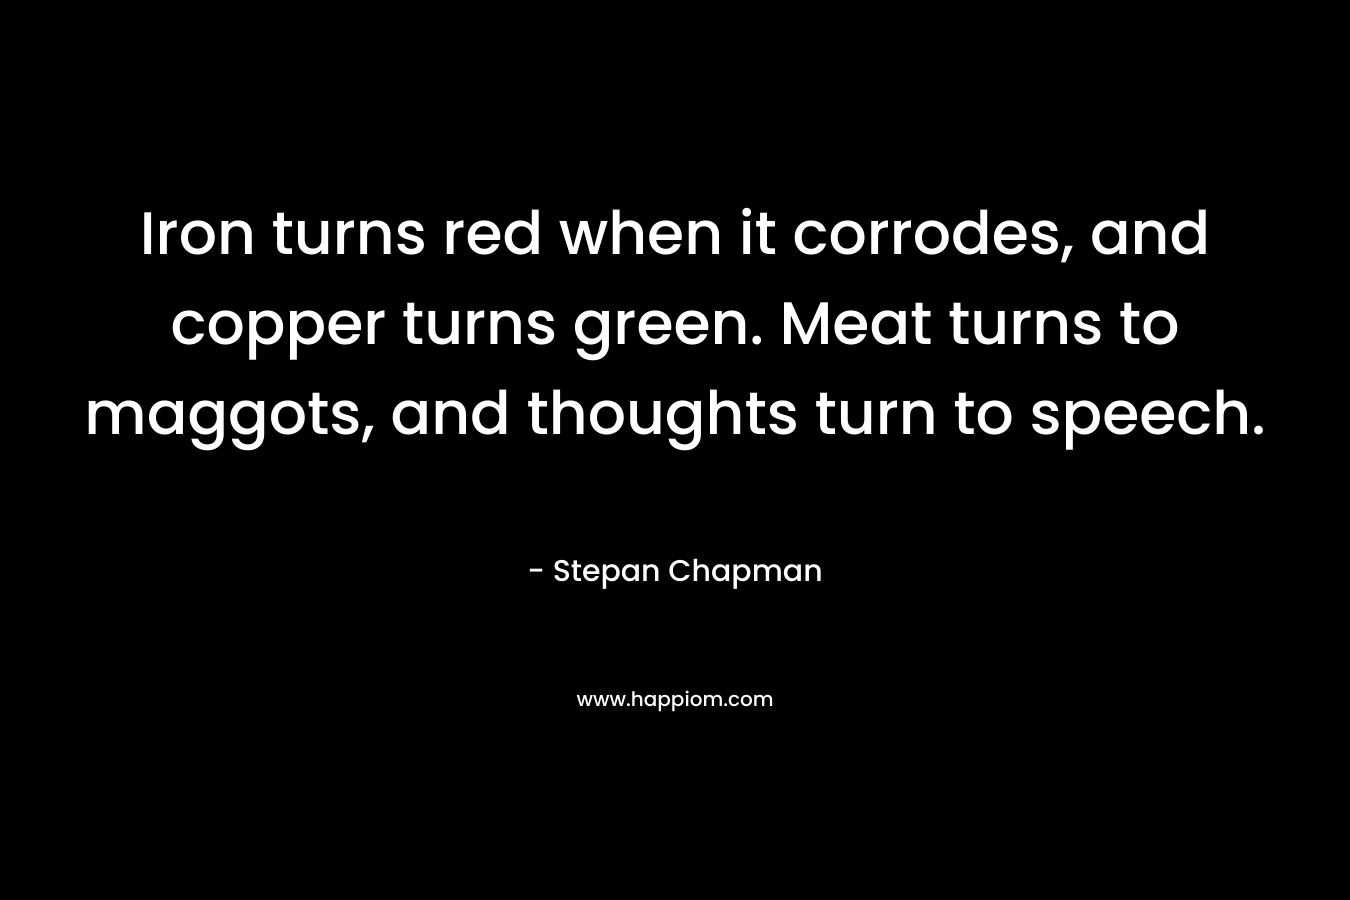 Iron turns red when it corrodes, and copper turns green. Meat turns to maggots, and thoughts turn to speech.